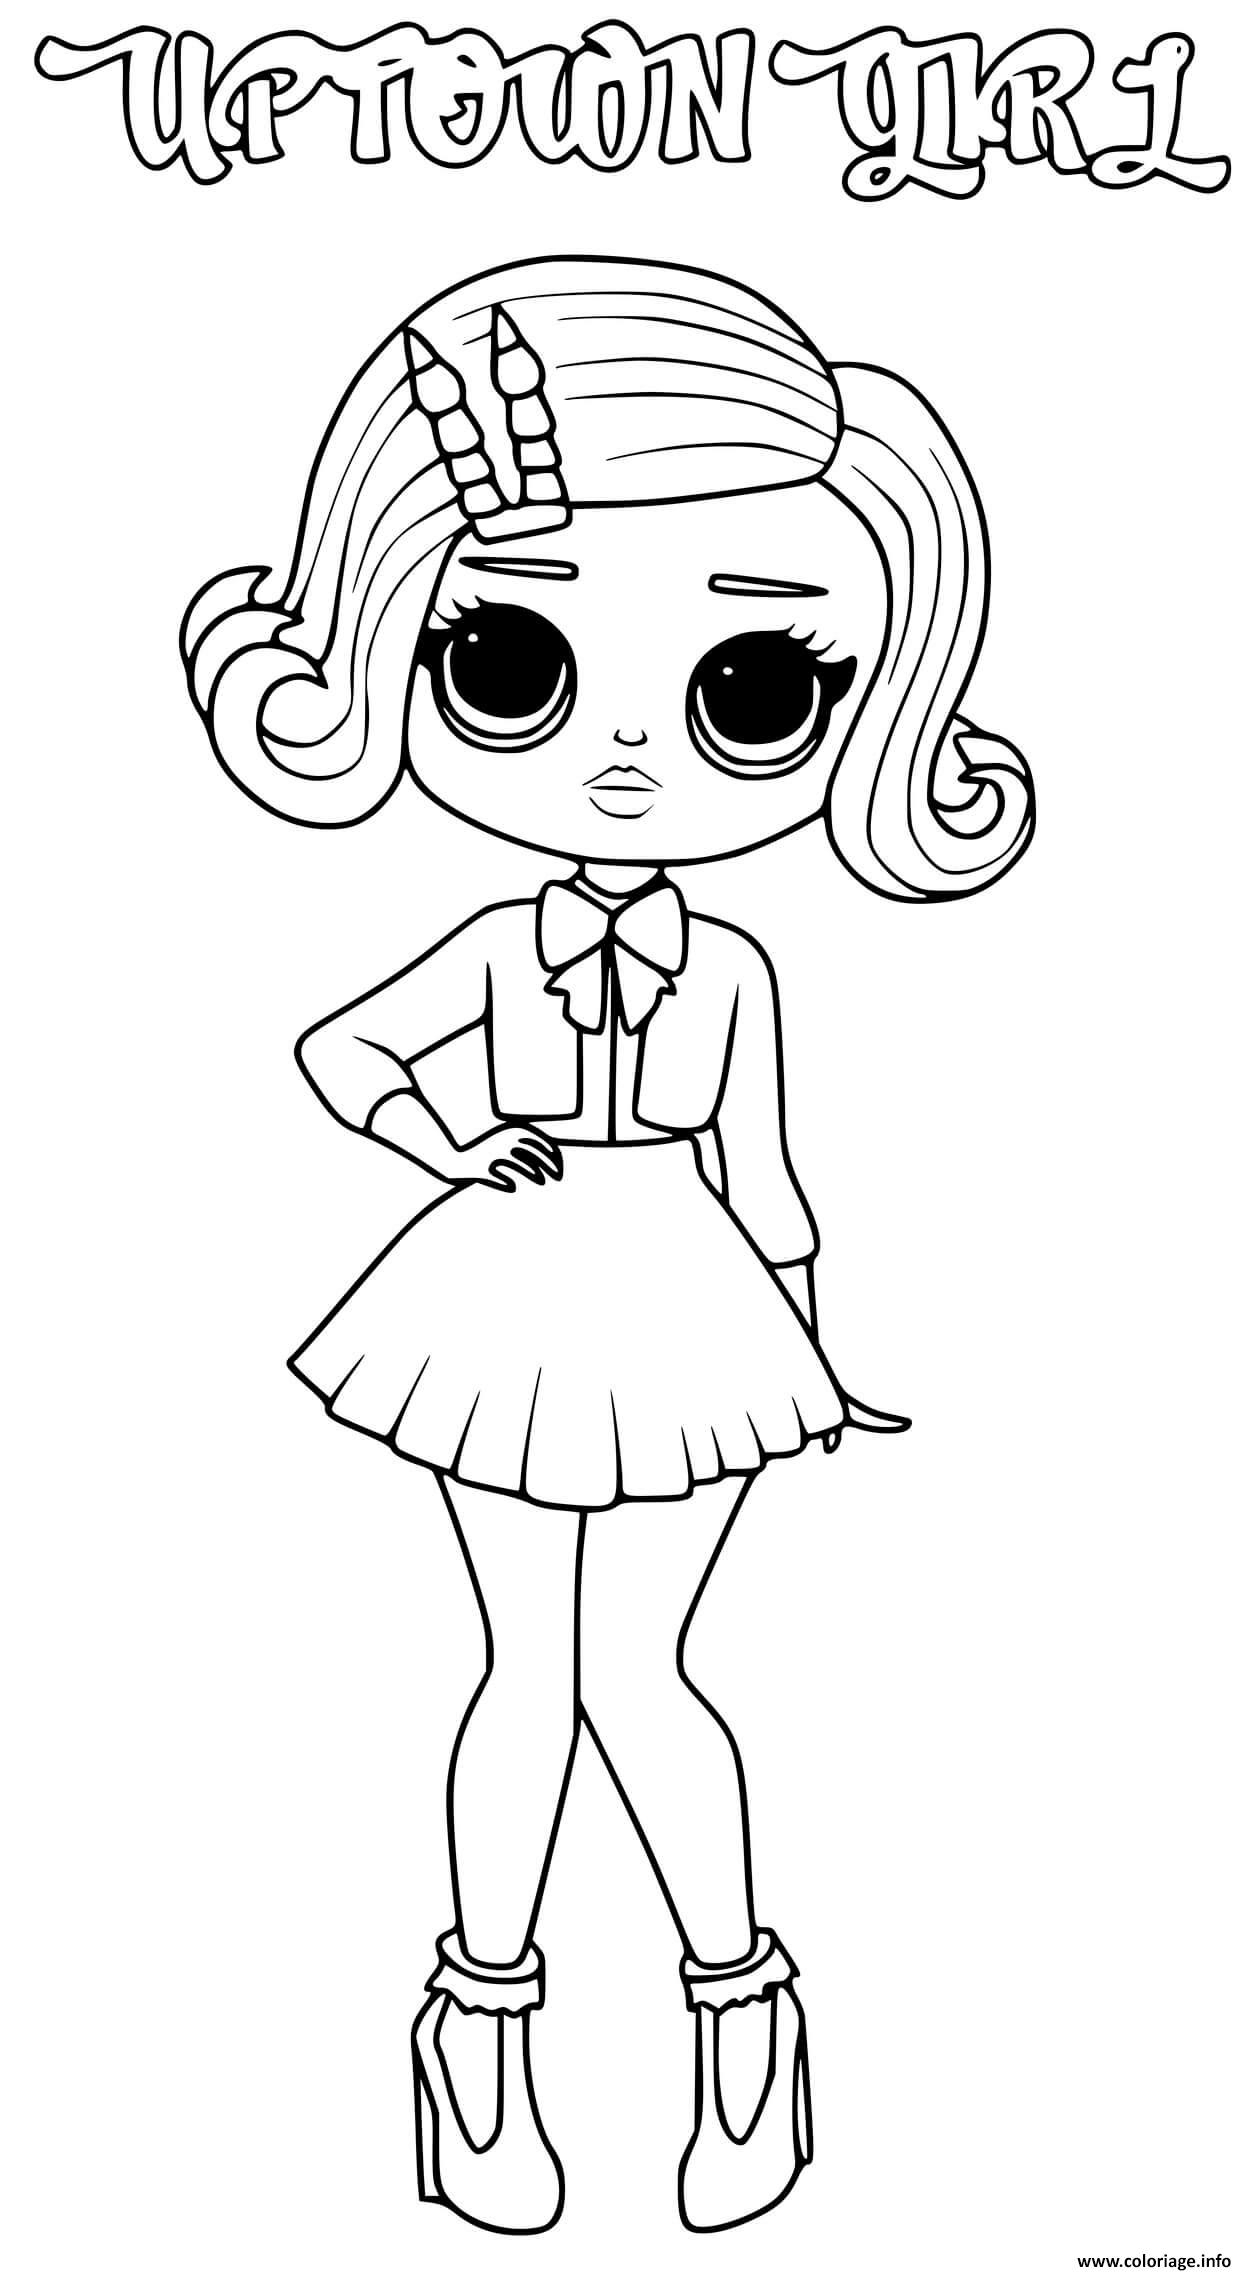 Coloriage Uptown Girl Lol Omg Dessin Poupee Lol À Imprimer tout Coloriage À Imprimer Poupée Lol